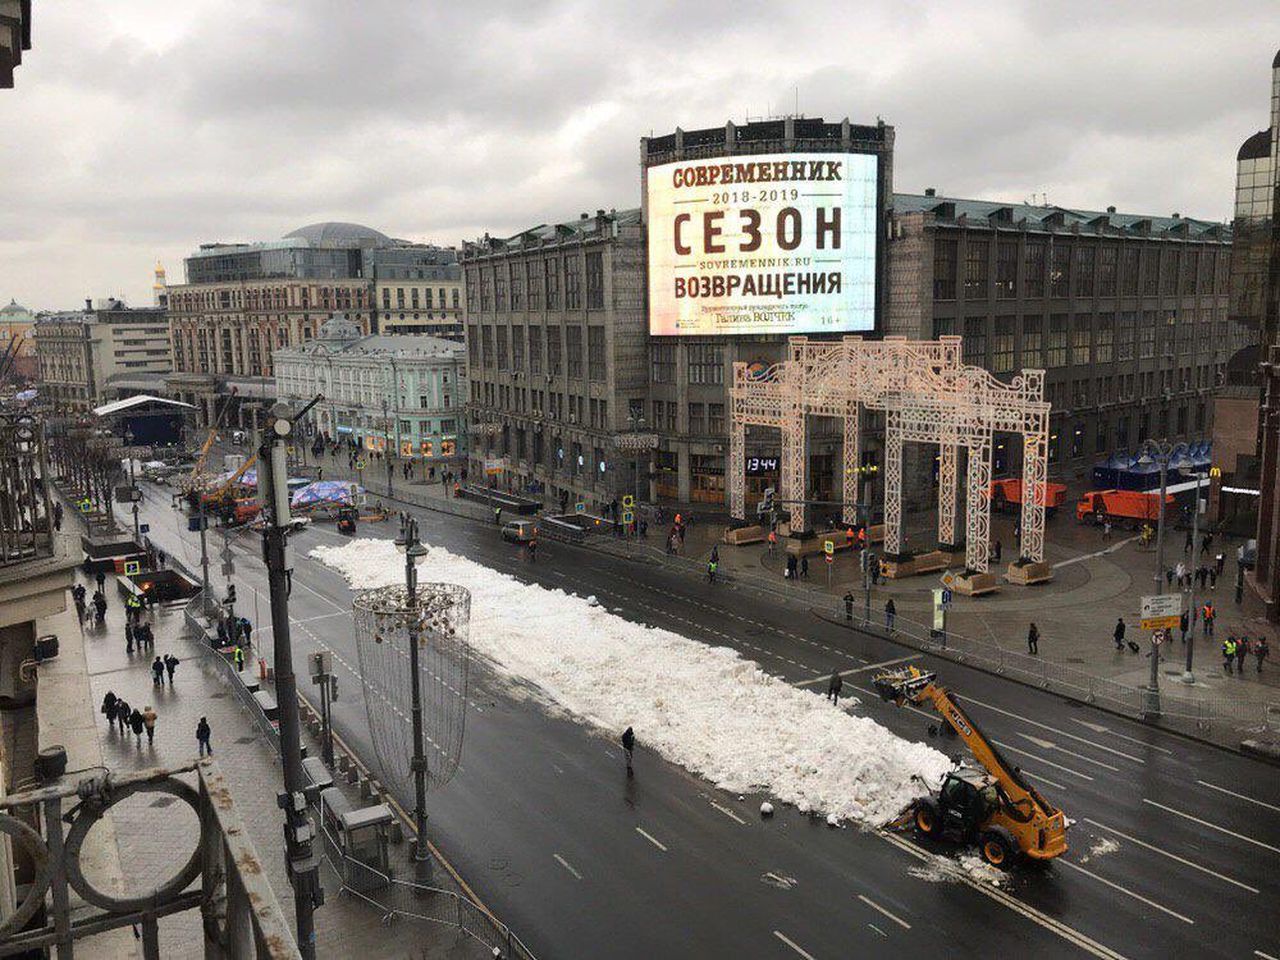 Moscow is experiencing unusually high temperatures this year, image via The Guardian